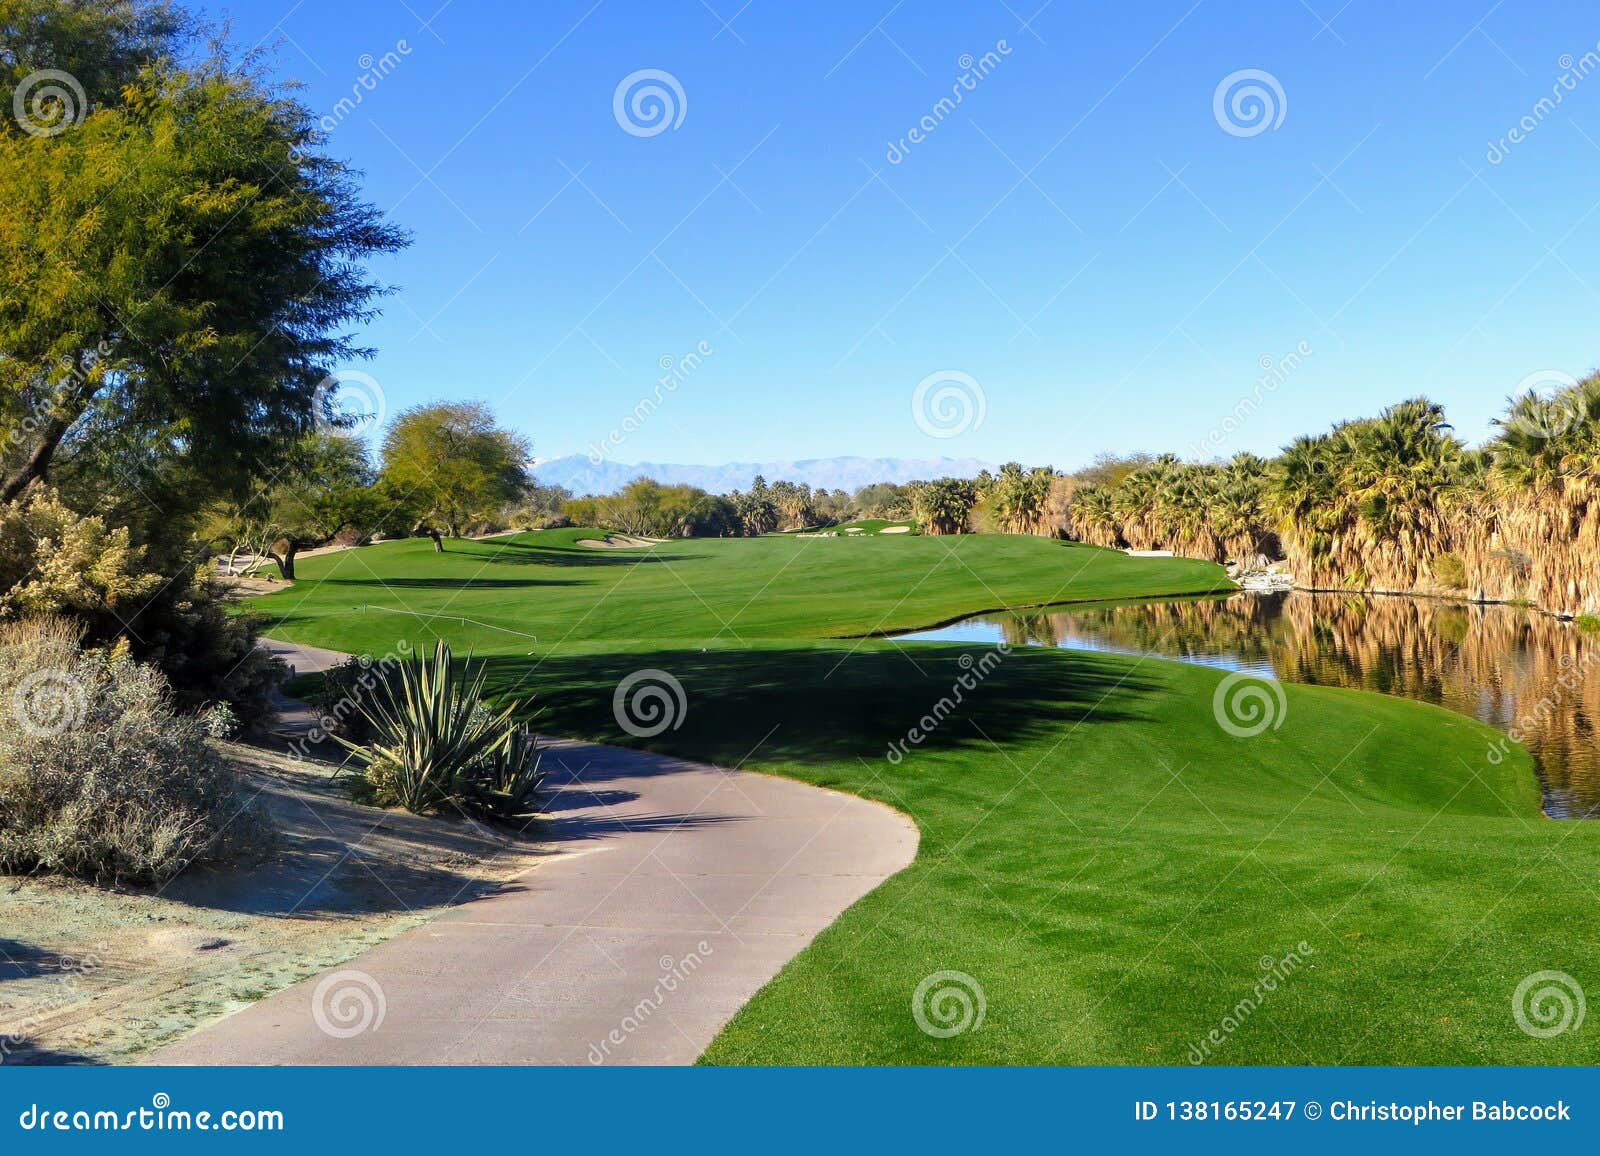 a beautiful view of a par 5 with the desert surrounding the hole as well as a pond. the golf course is in palm springs